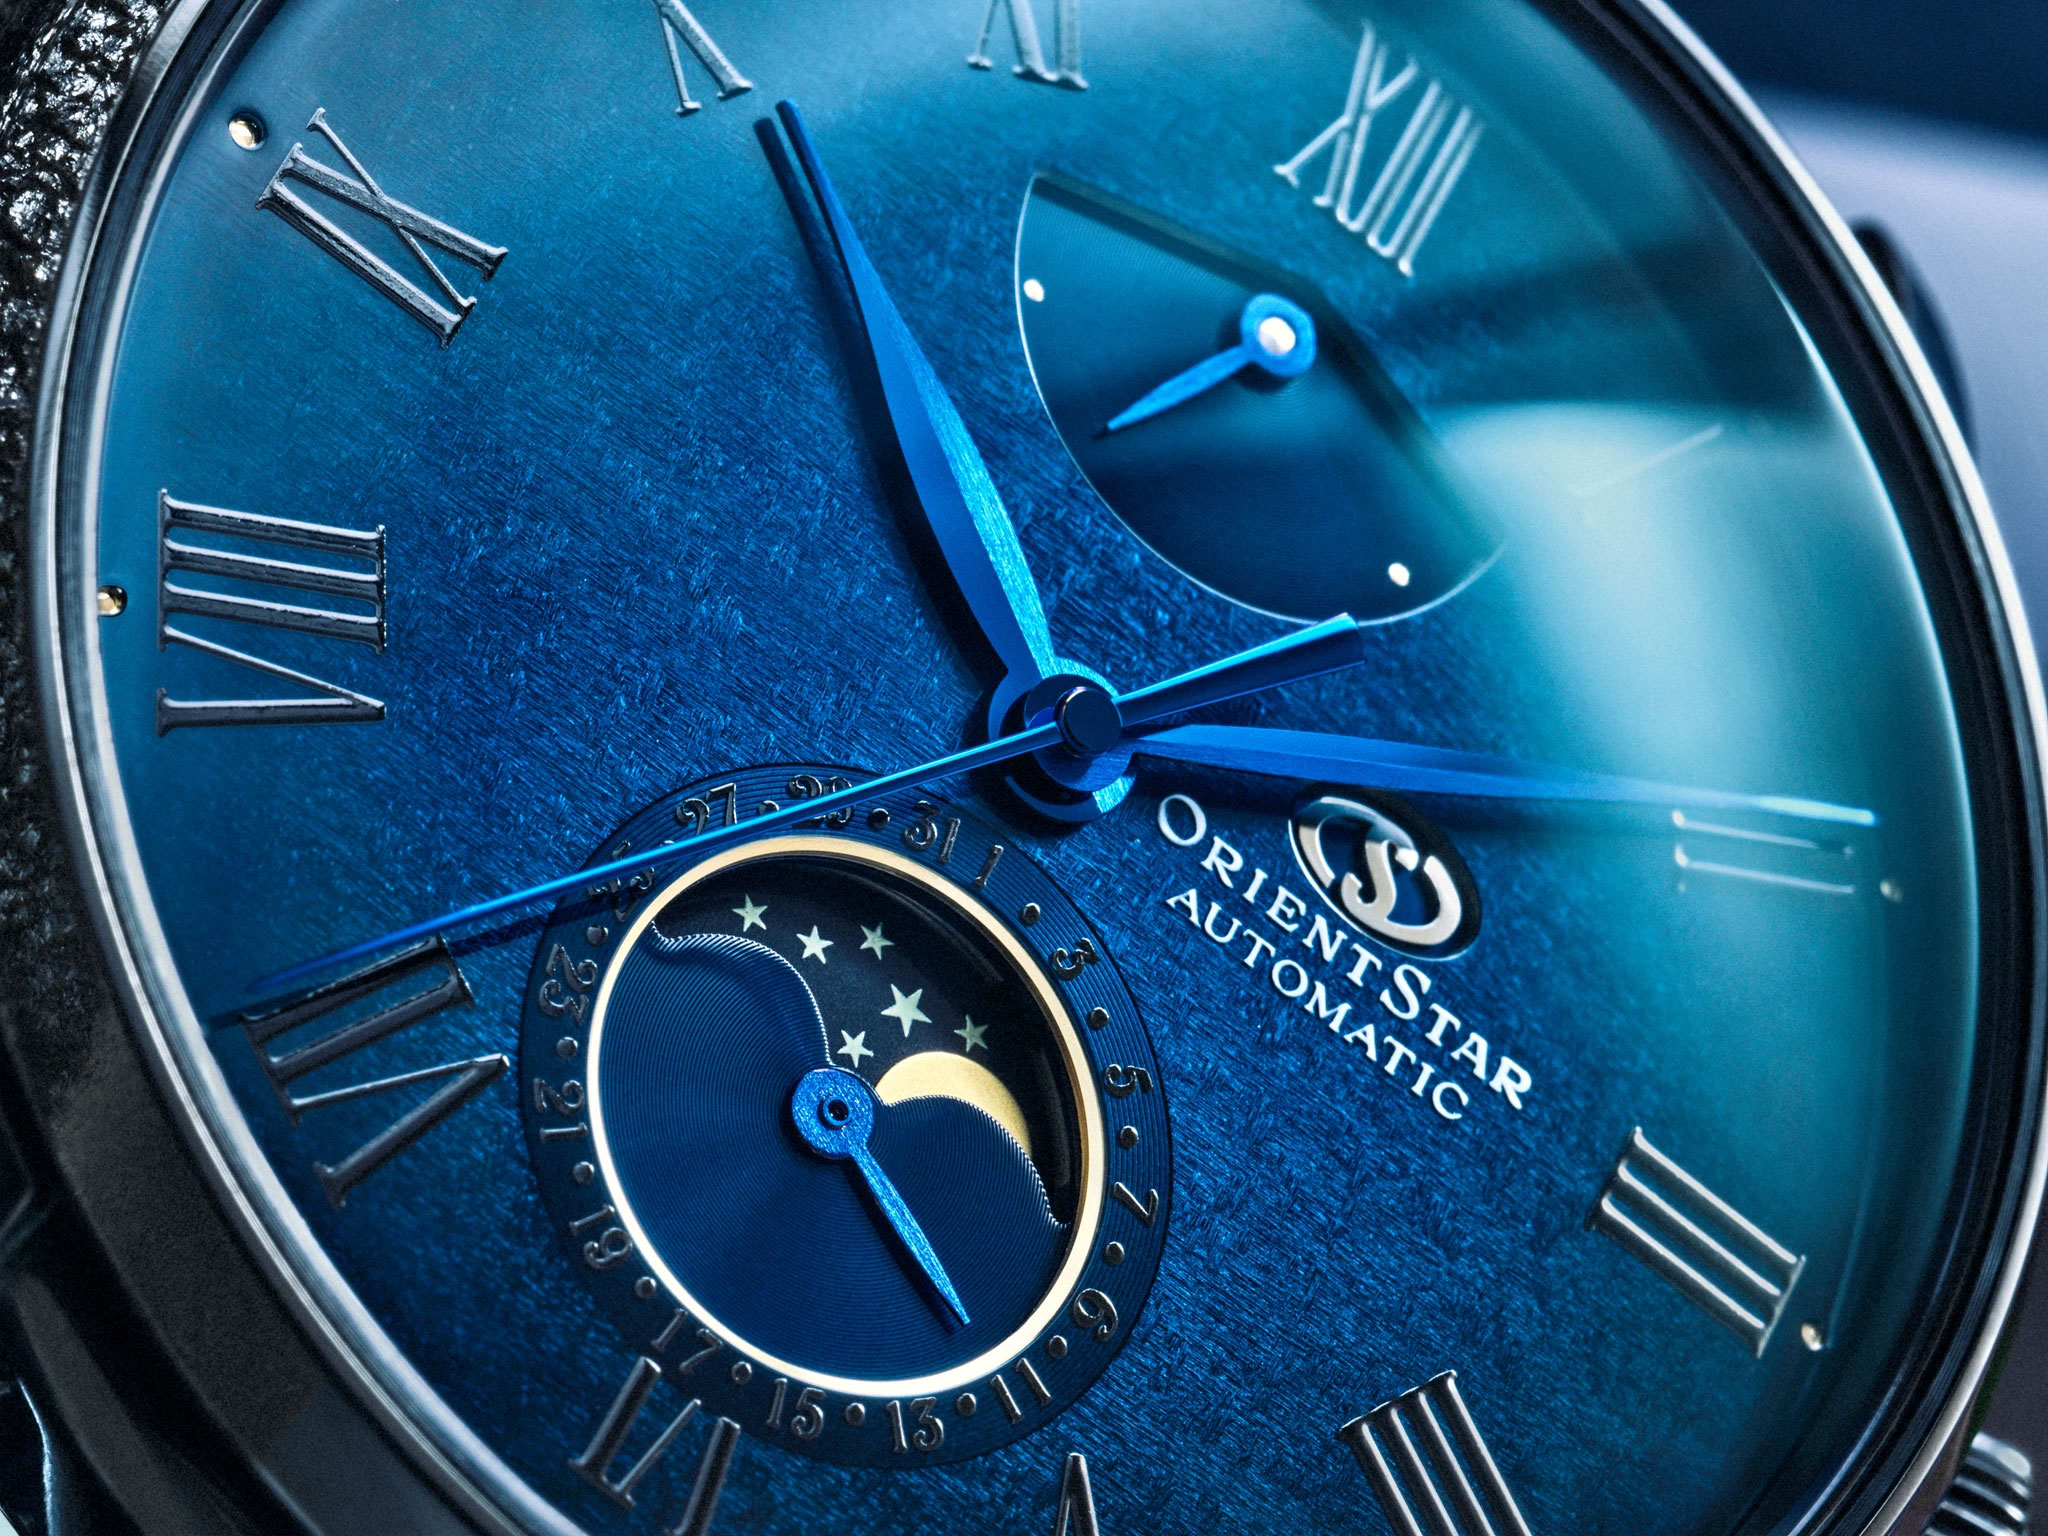 An extreme close up crop of the blue dial M45 F7 Mechanical Moon Phase watch